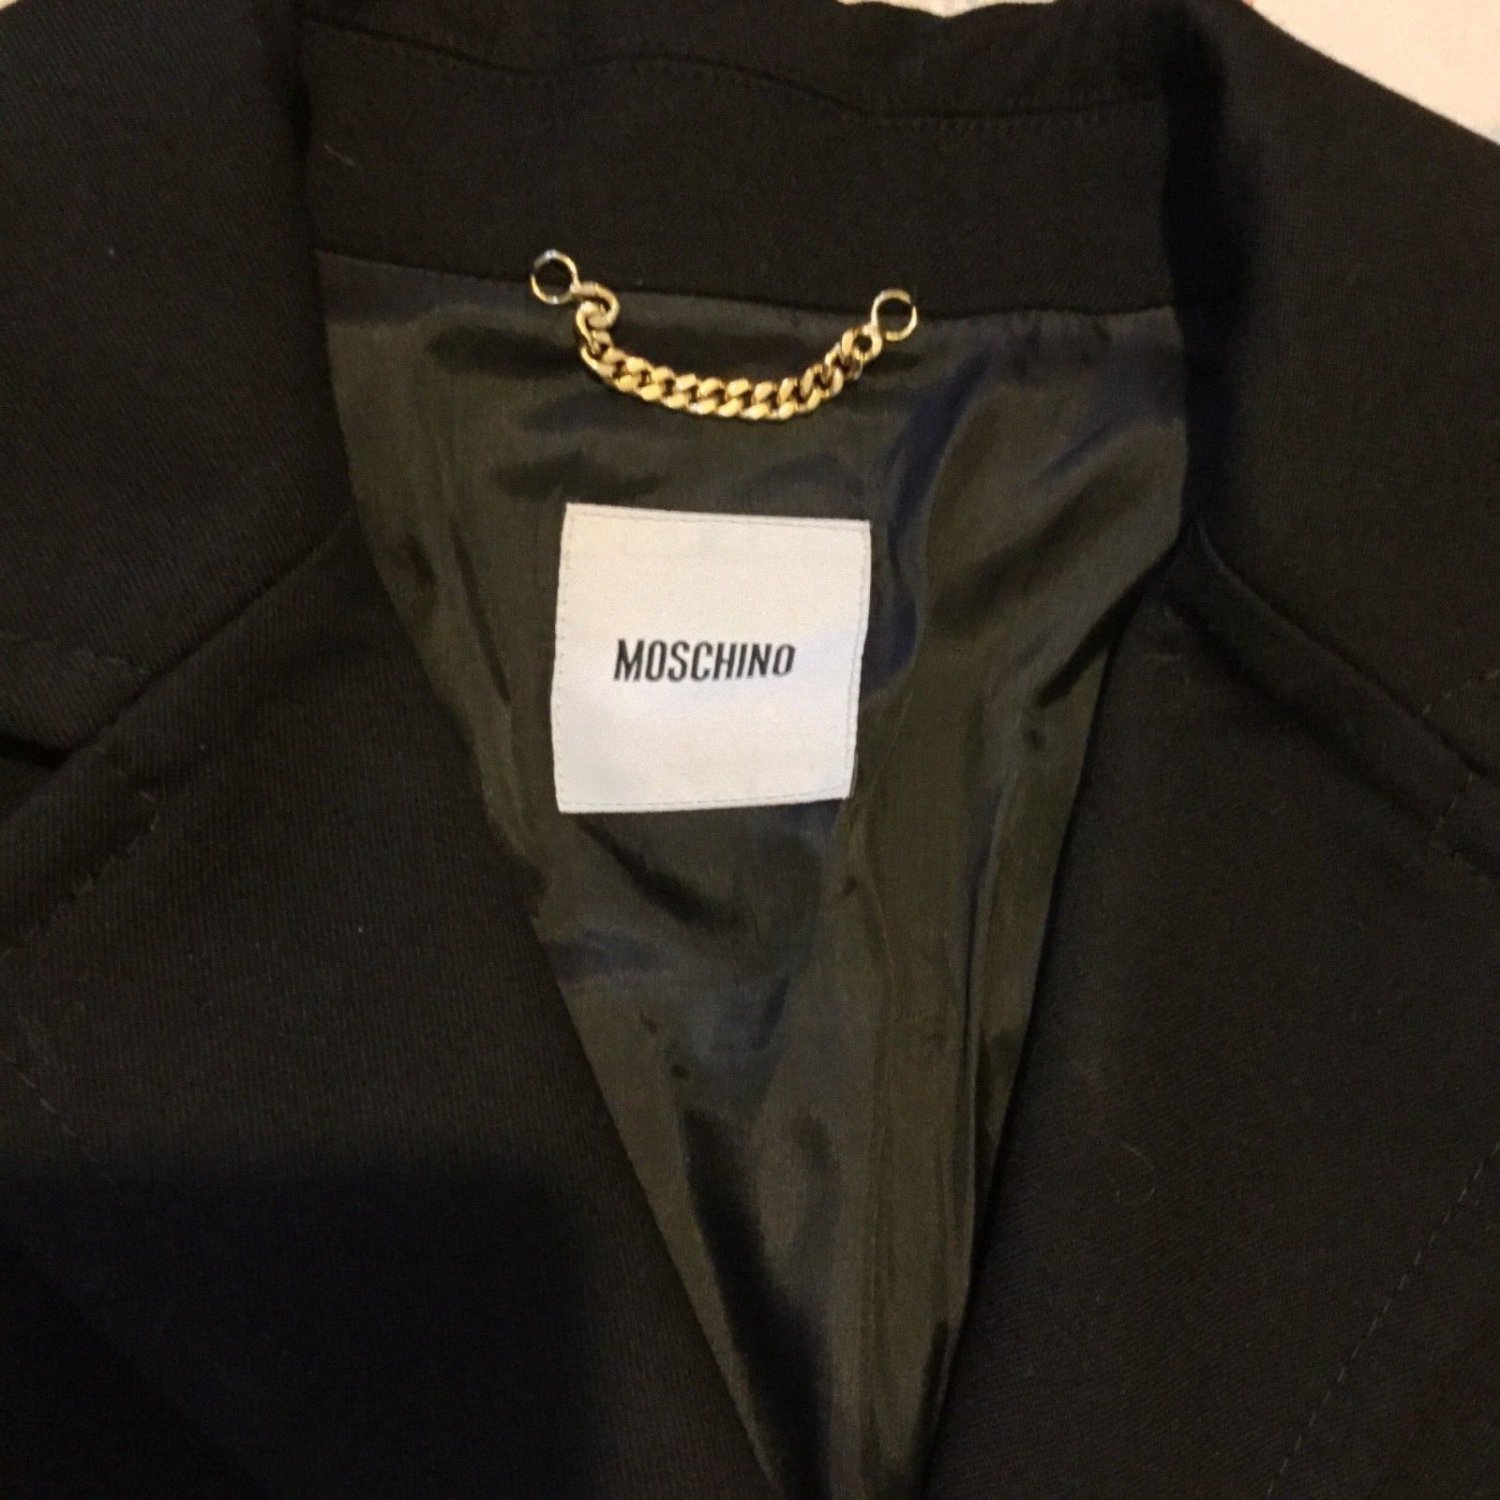 EXCELLENT COND. Moschino AEFFE Spa Italy Black Wool Jacket - 10